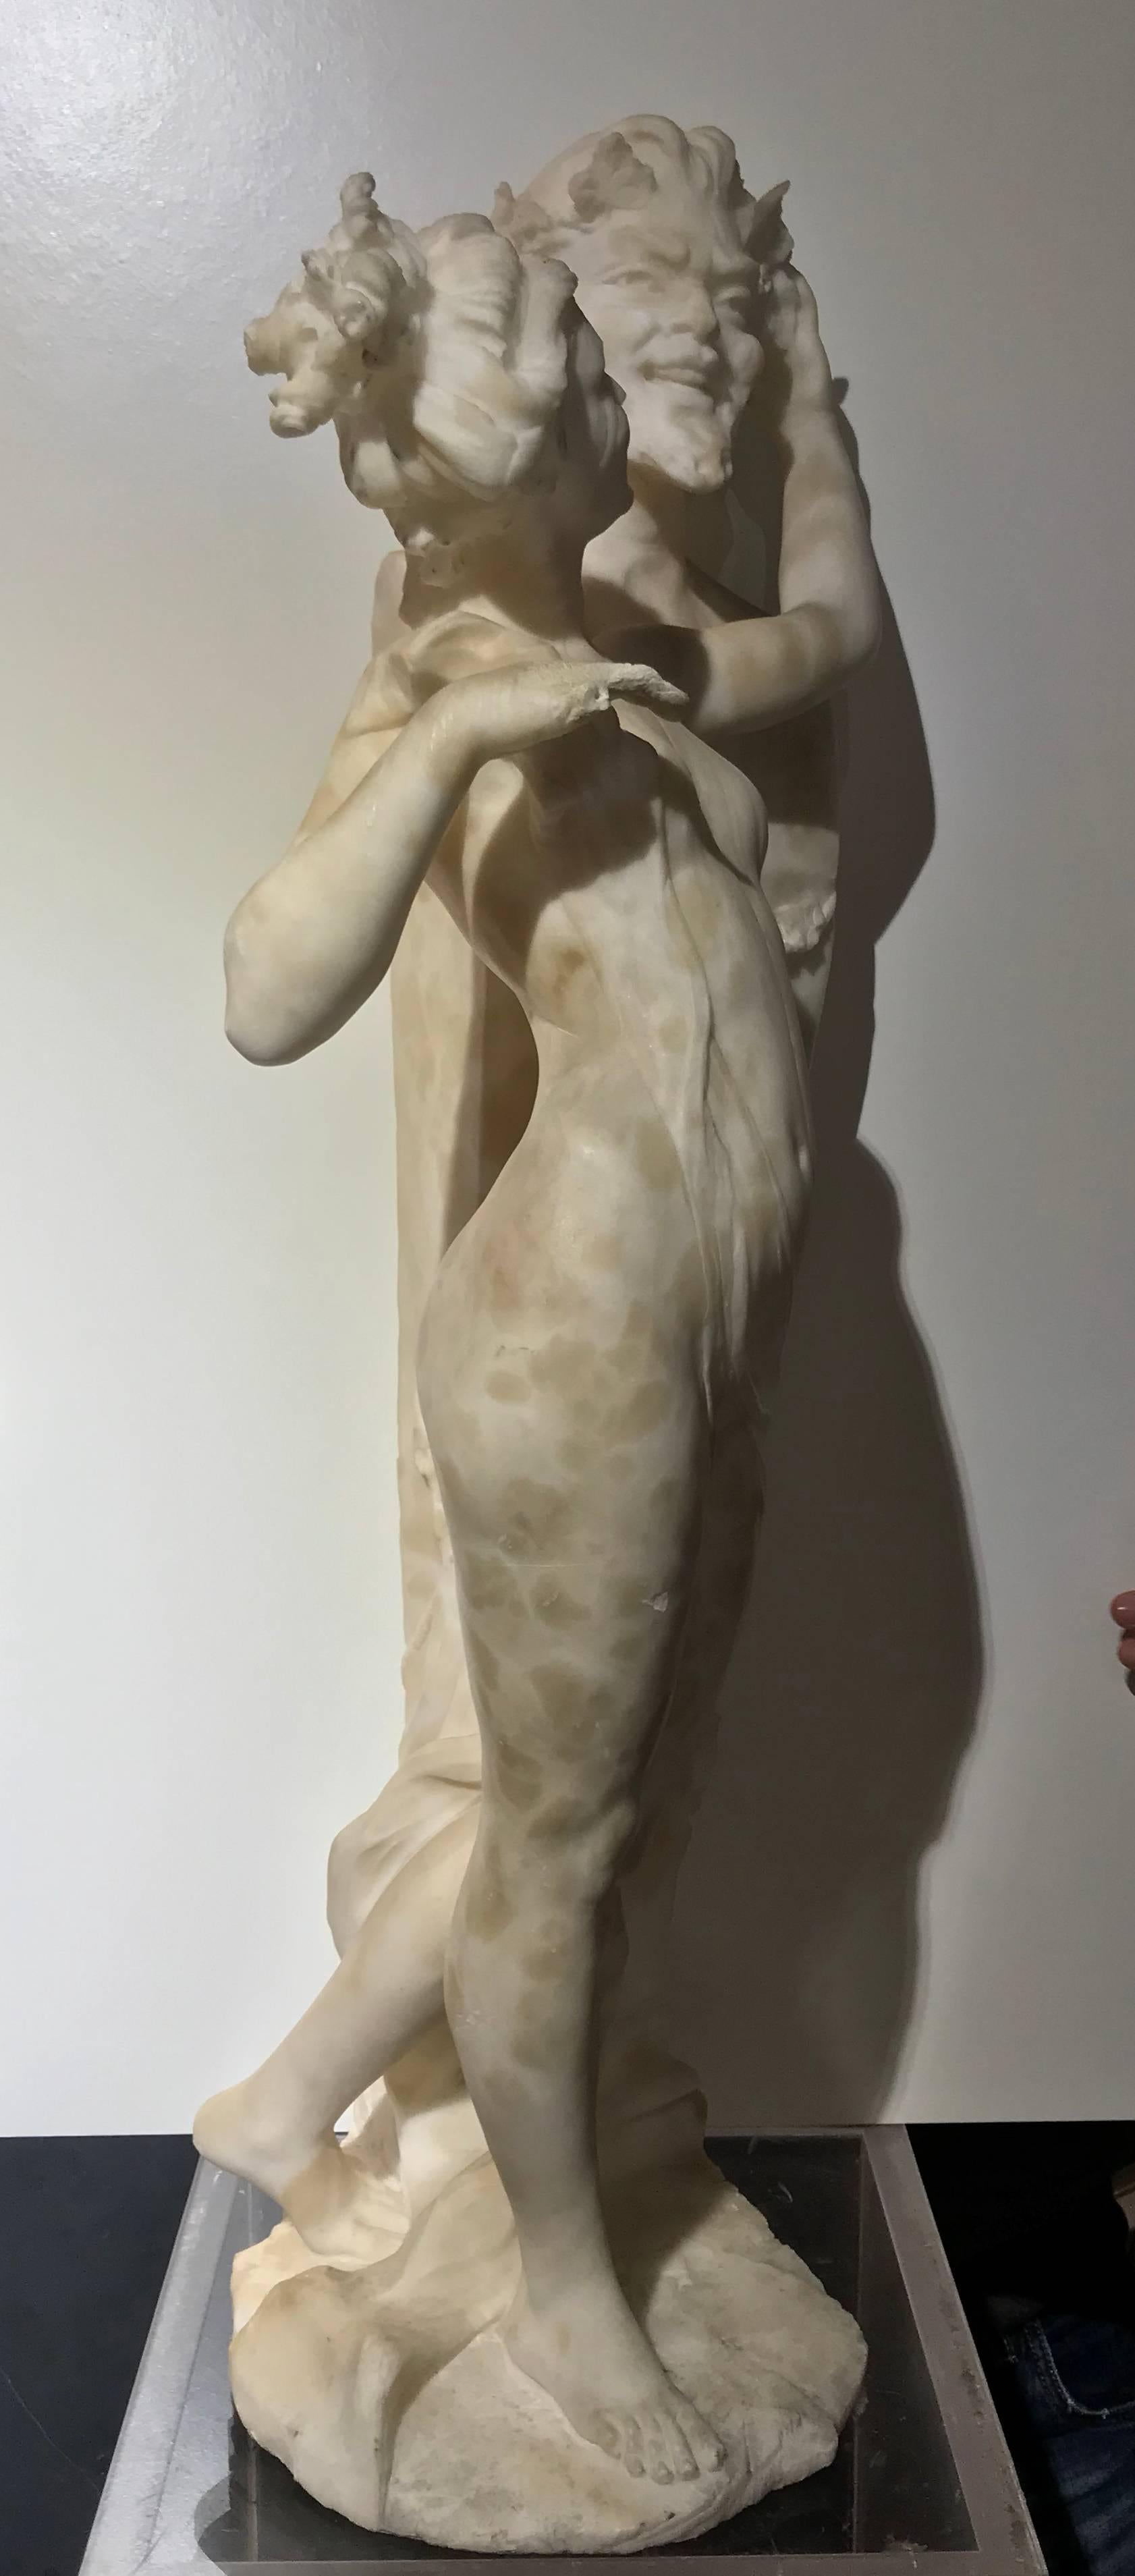 19th Century Italian Tuscany Neoclassical Style White Alabaster Sculpture Signed Fiaschi For Sale